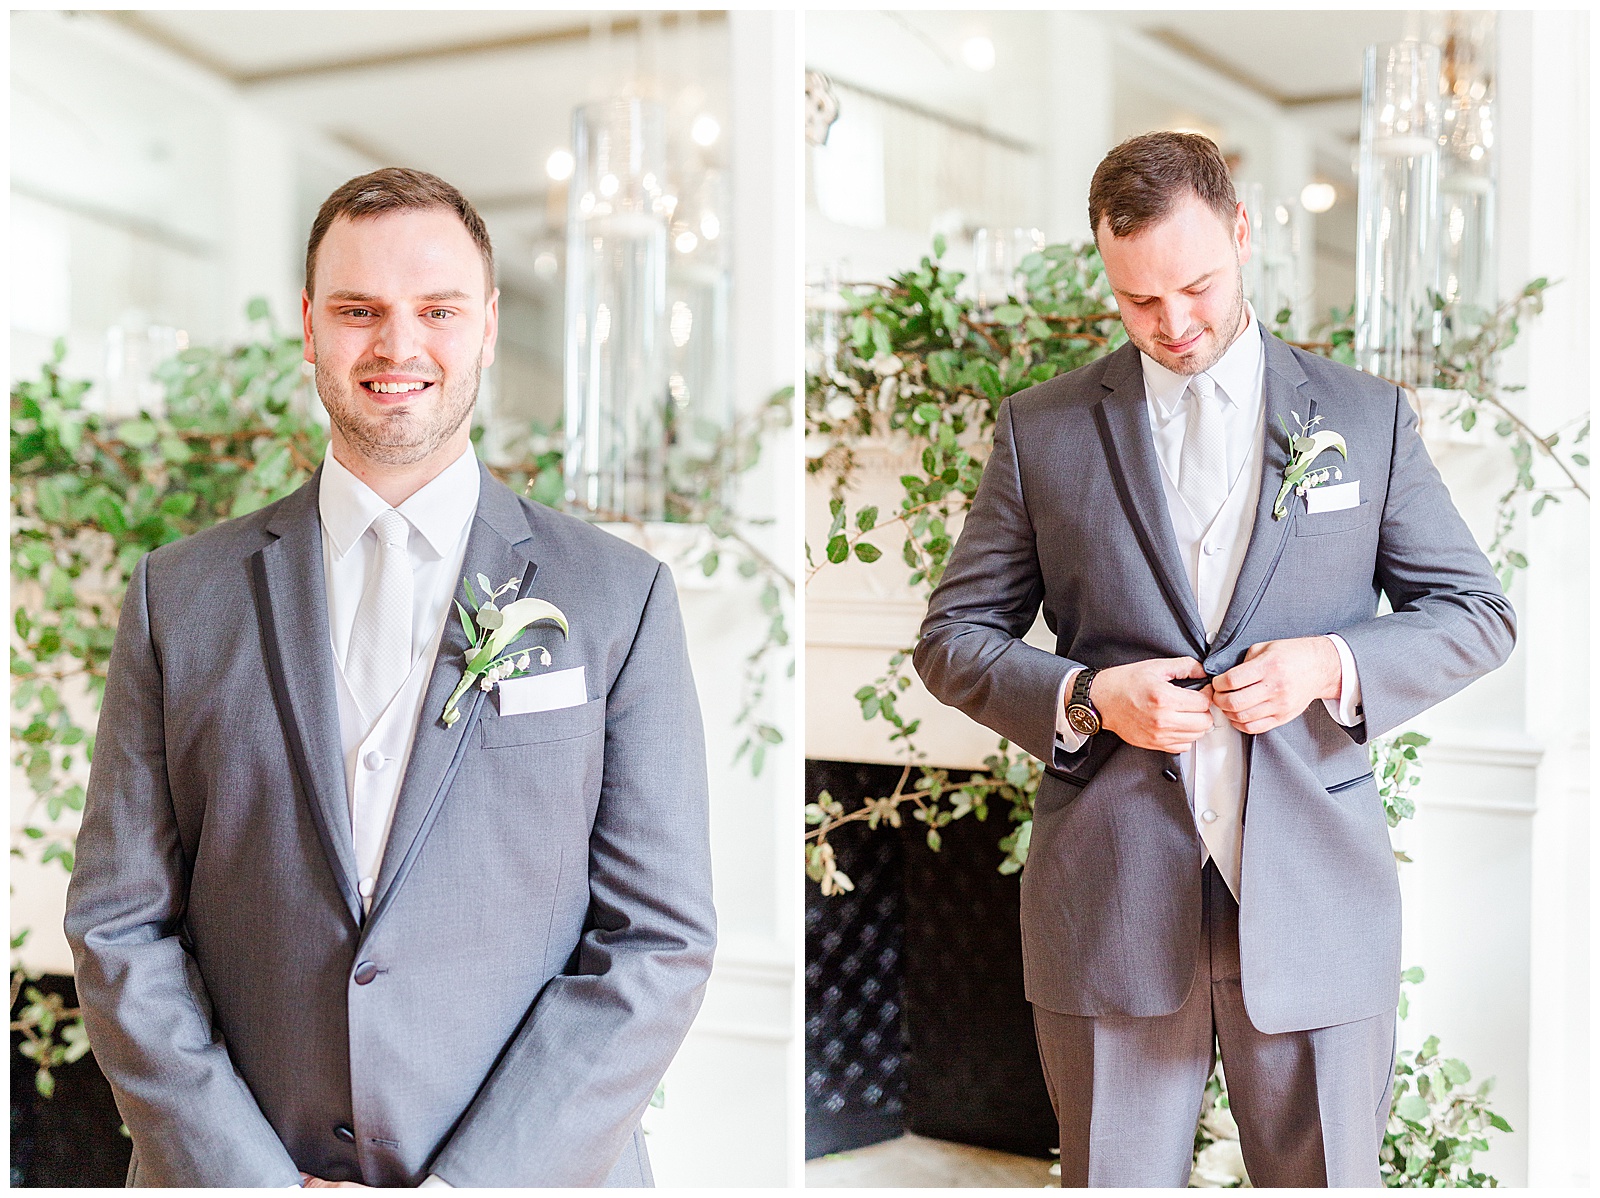 Groomsmen Getting Ready for Gorgeous 1940s Modern Vintage Wedding in Charlotte, NC | check out the full wedding at KevynDixonPhoto.com 